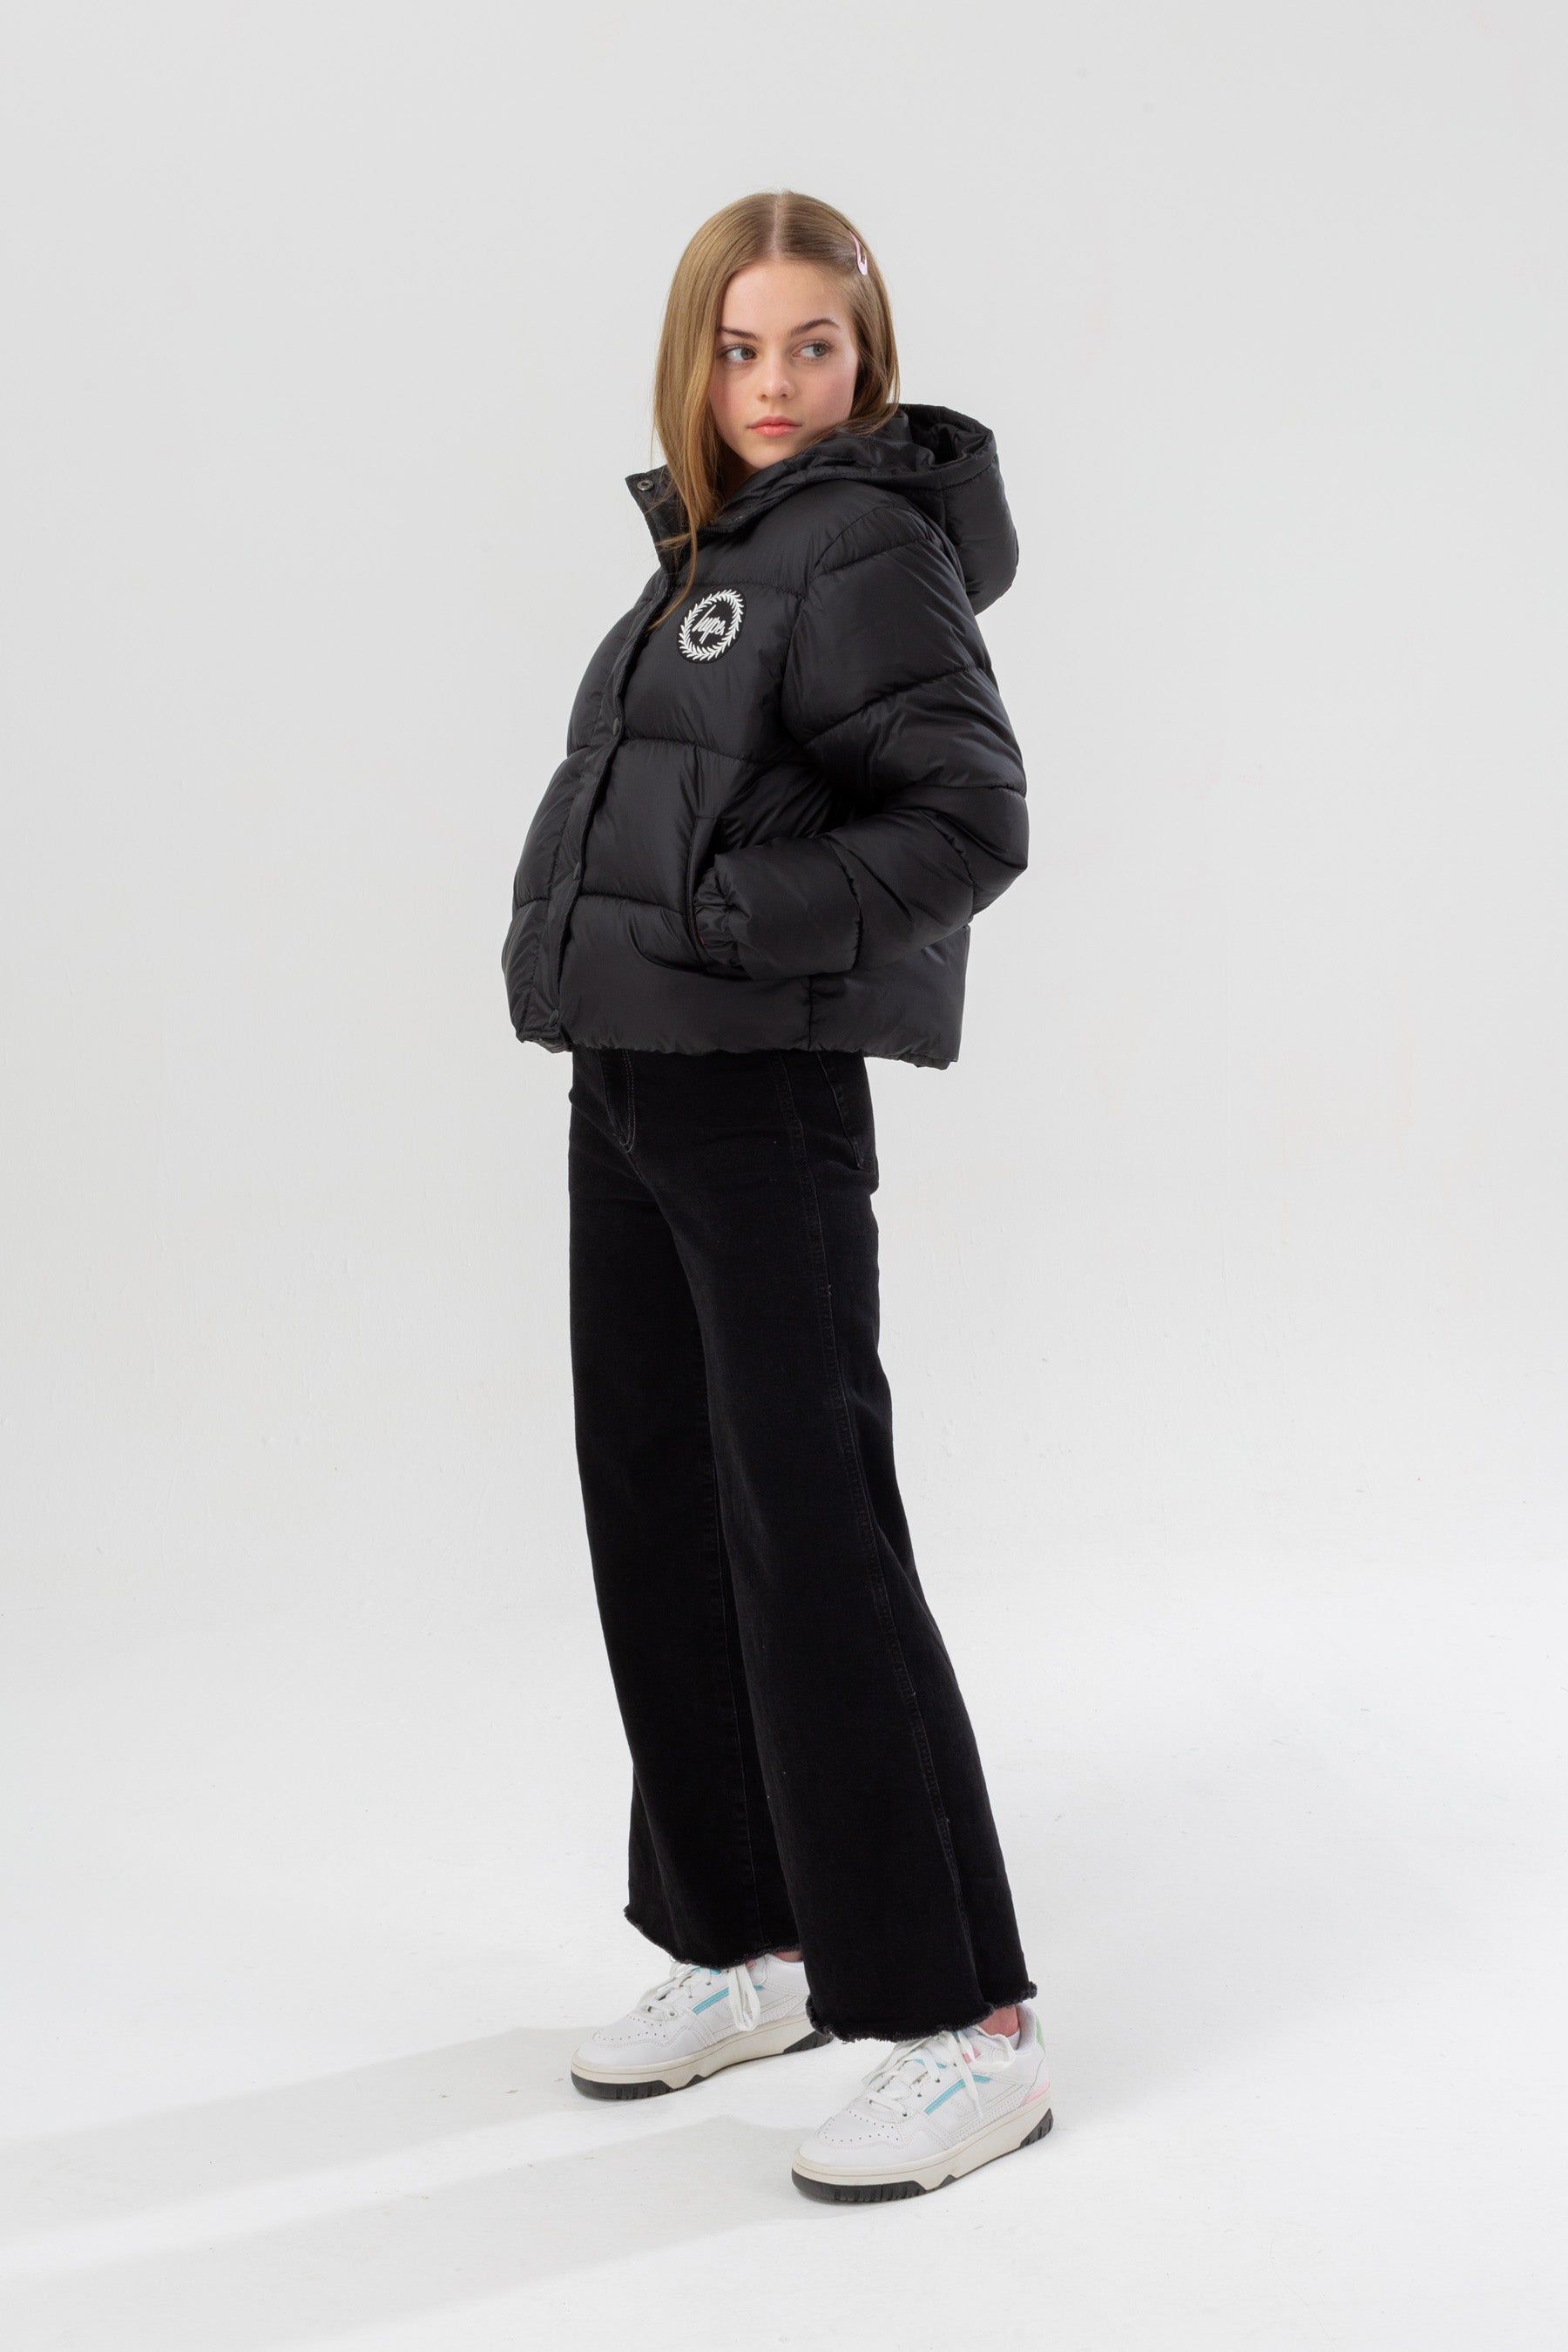 Meet the HYPE. Girls Black Cropped Kids Puffer Jacket, part of the HYPE. 2022 Back to School collection. The coat is designed in our standard cropped puffer shape in a classic black. Finished with padding, the iconic HYPE. crest badge logo in a contrasting monochrome, and two zip pockets on the front. Machine washable.